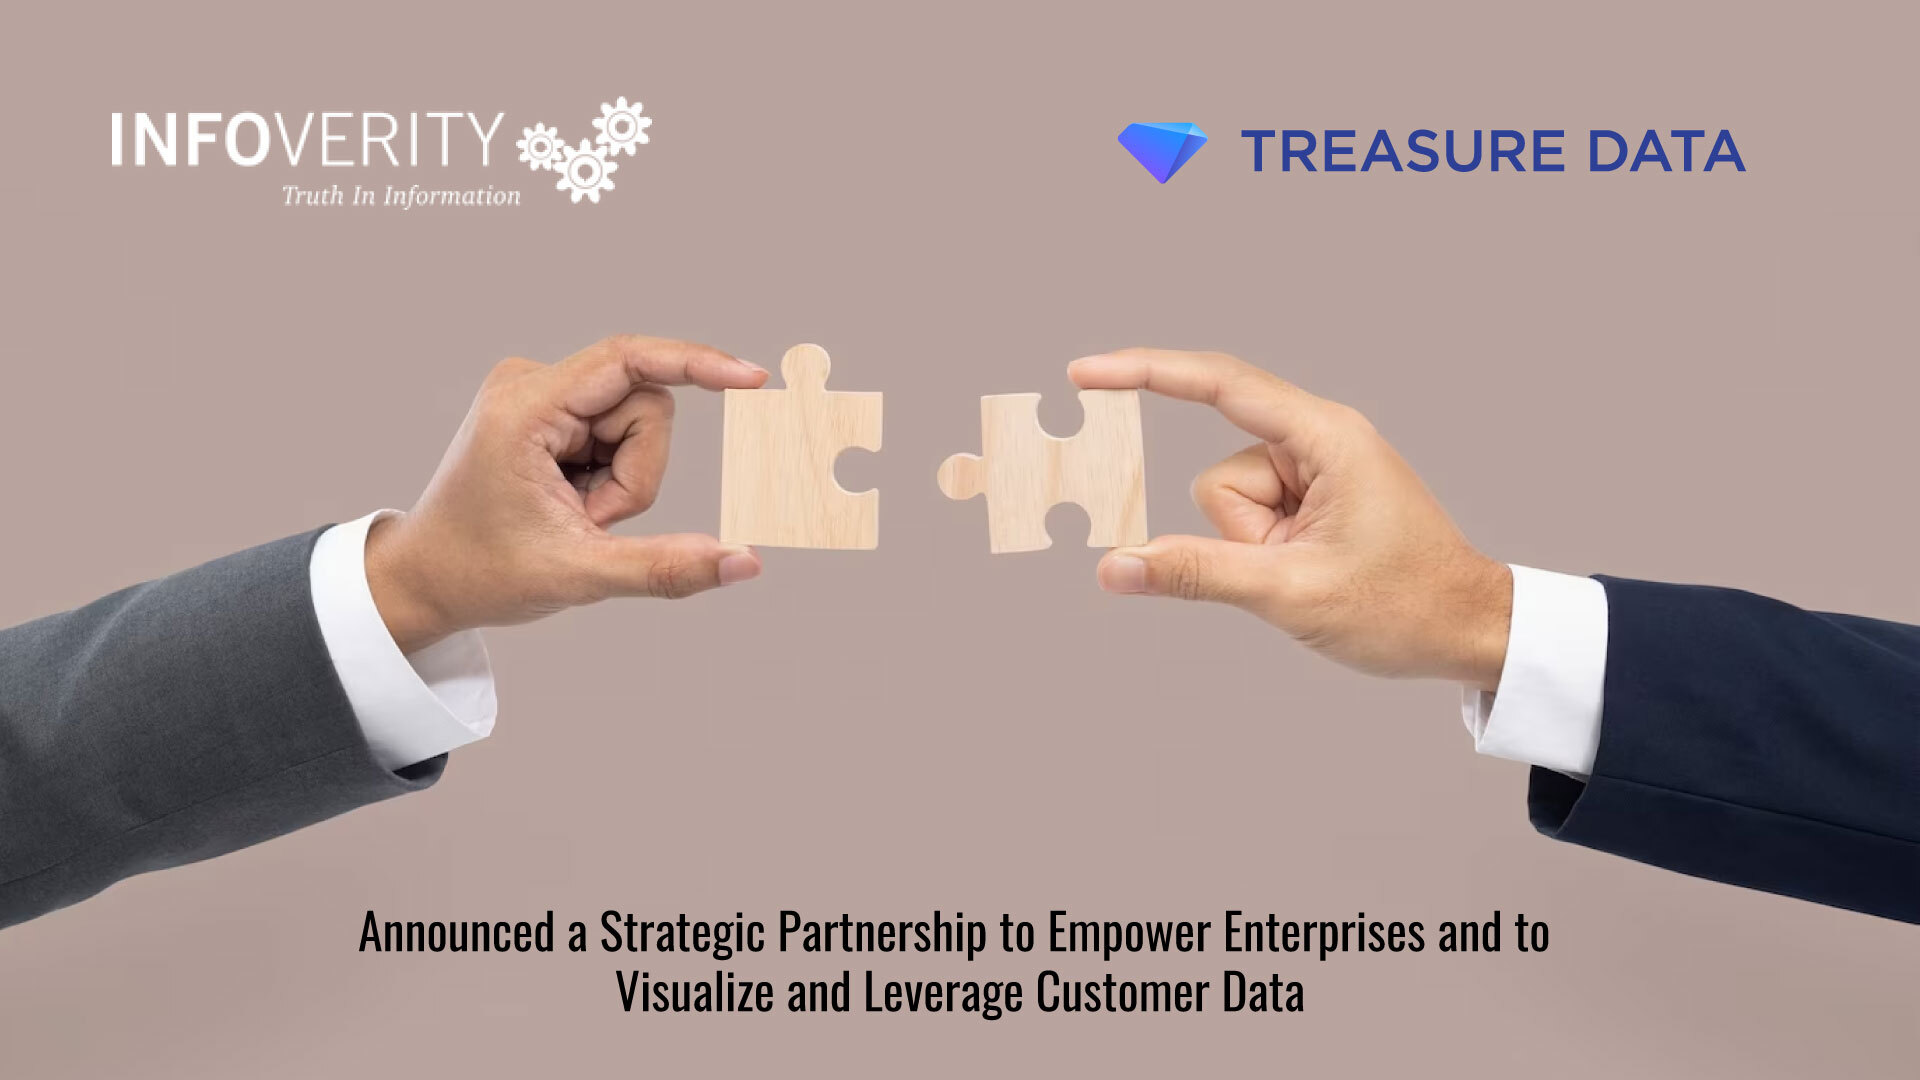 Infoverity and Treasure Data Partner to Empower Enterprises to Fully Visualize and Leverage Their Customer Data